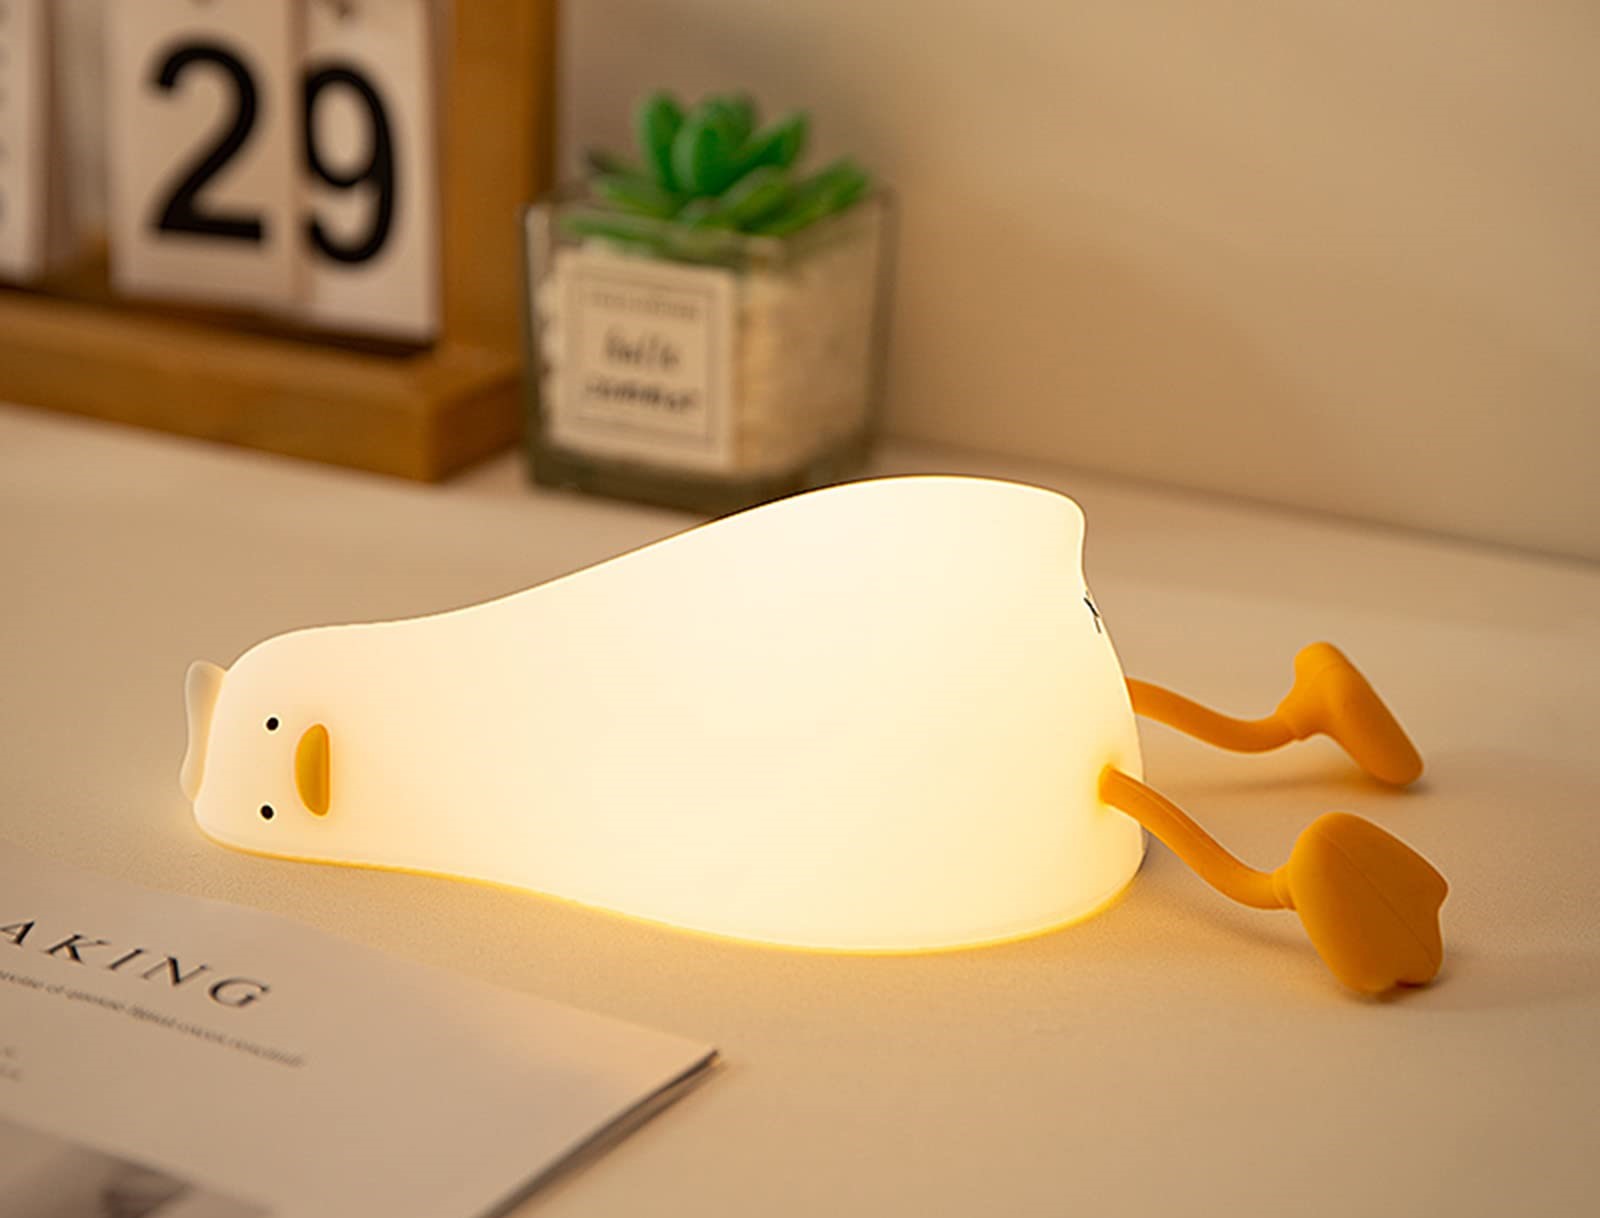 Nursery Night Light Review: A Must-Have for a Soothing Sleep